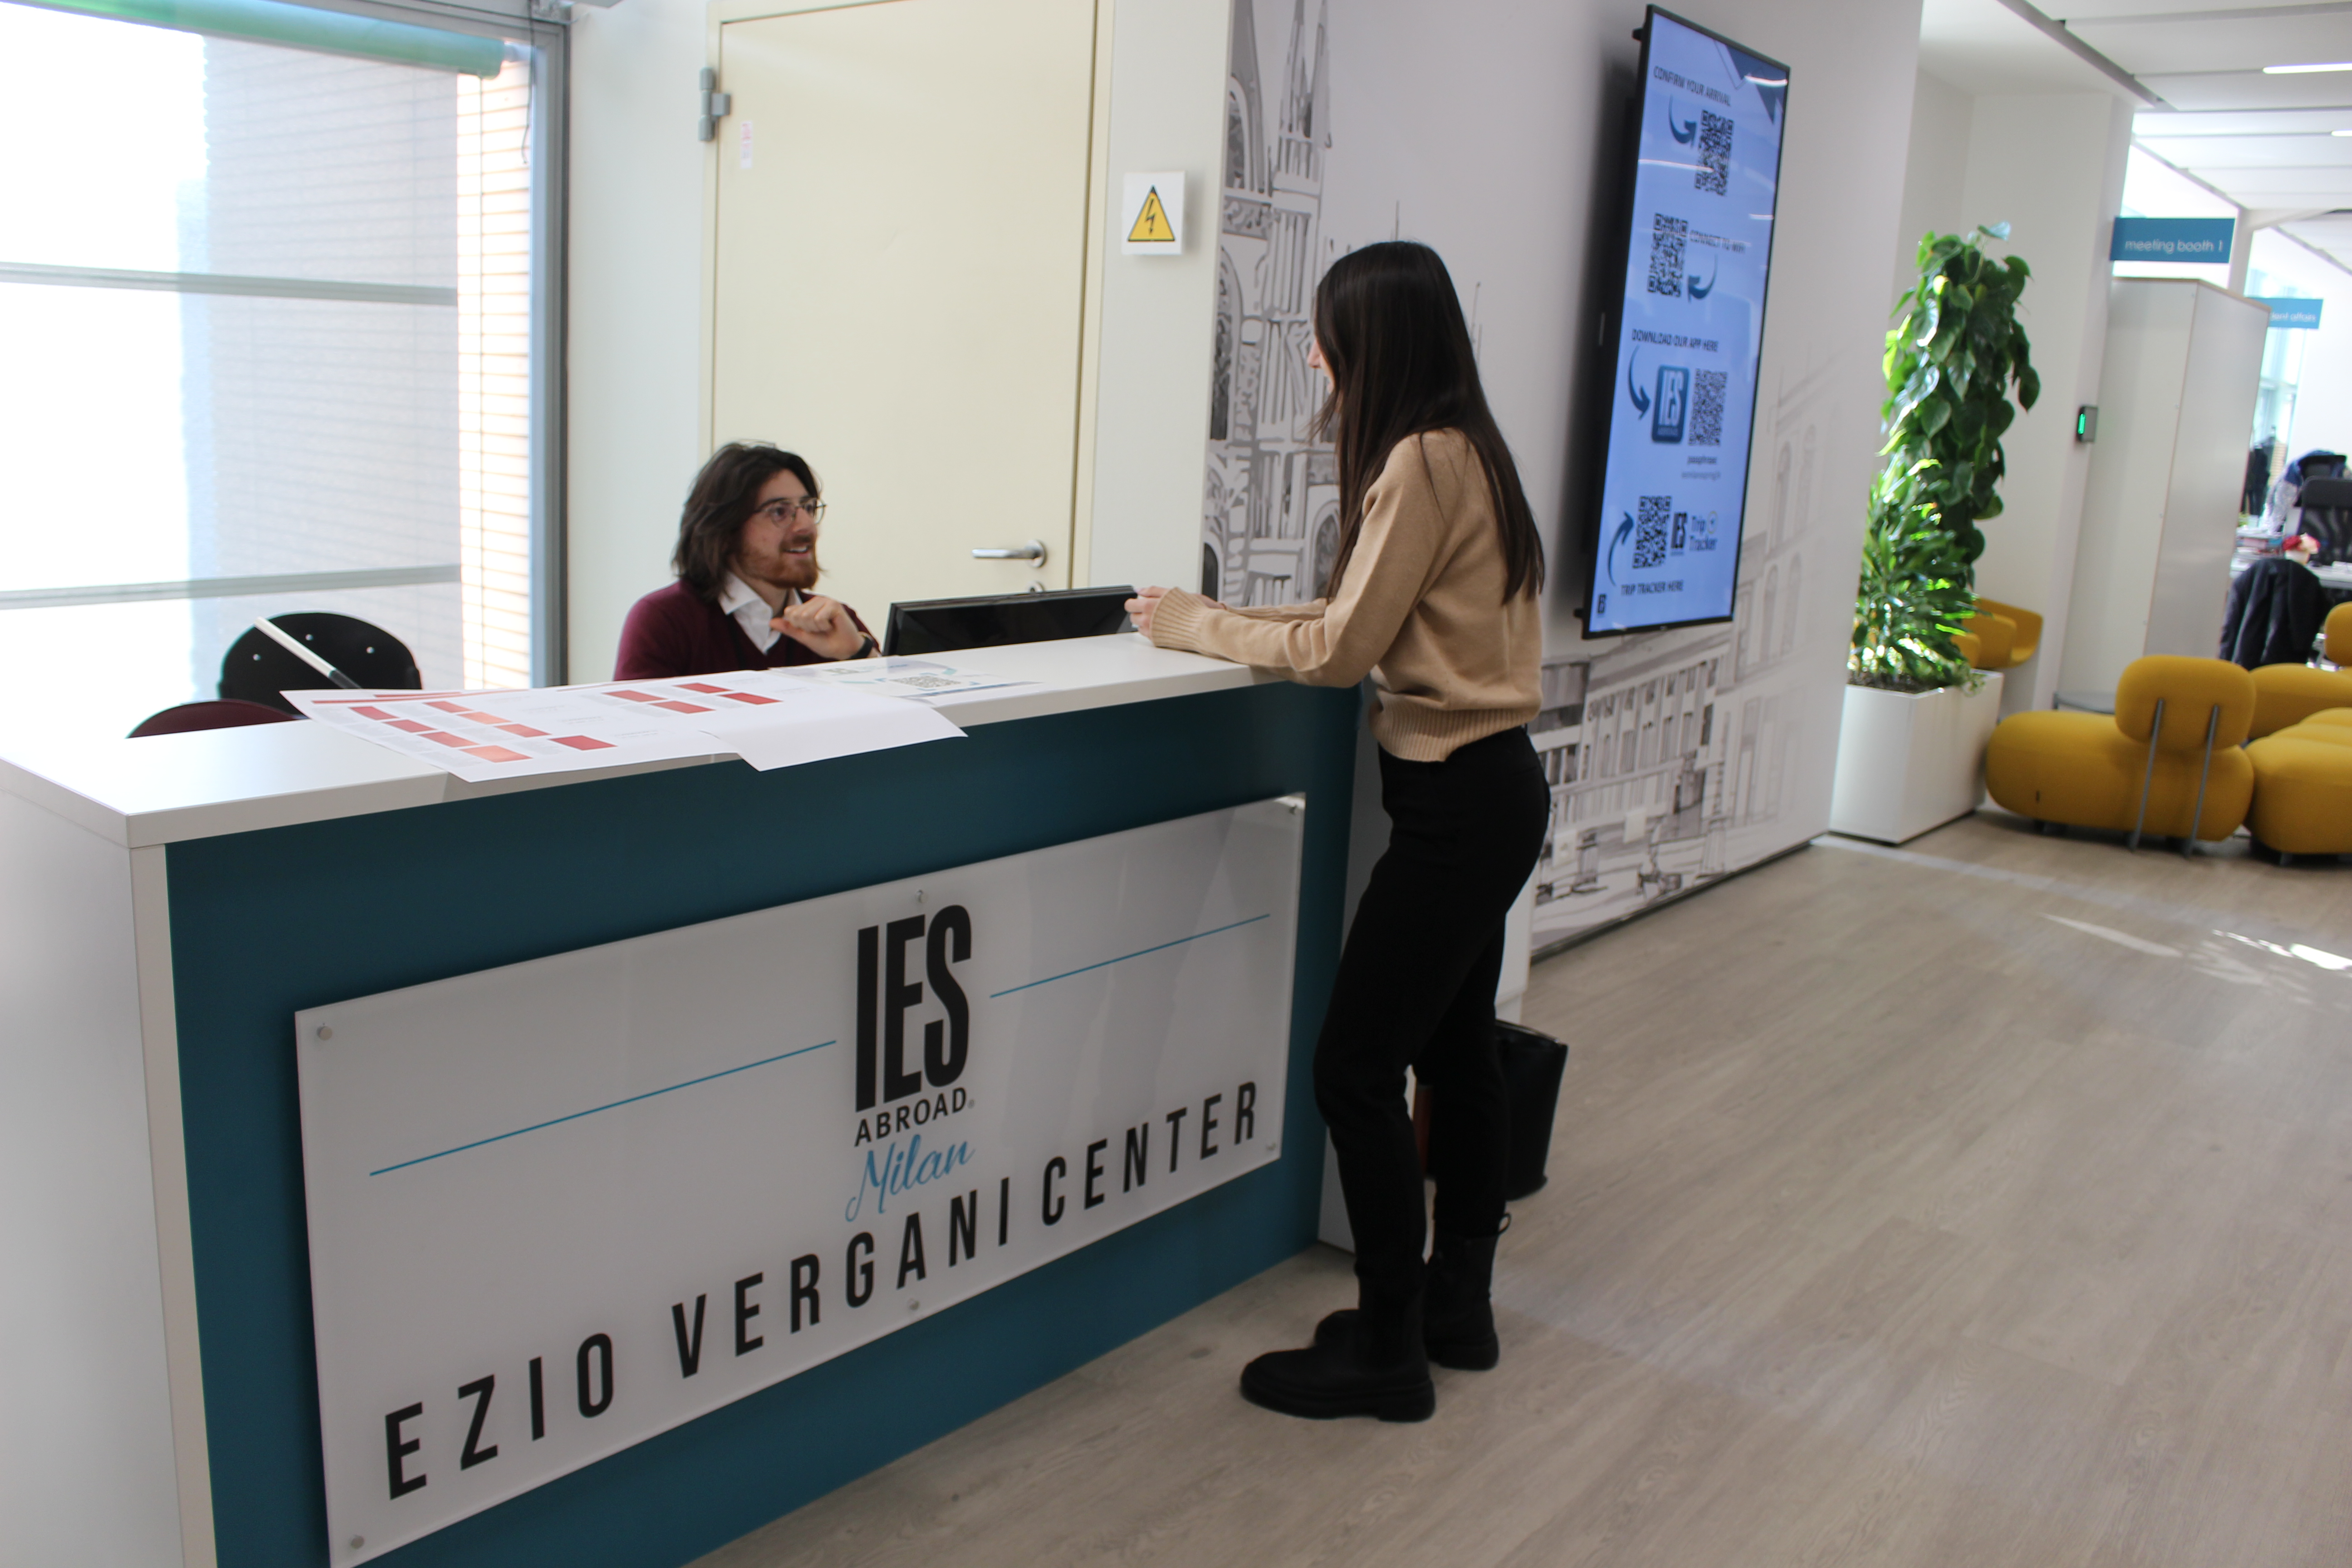 A student talking to a person at the front desk at the IES Abroad Milan Center